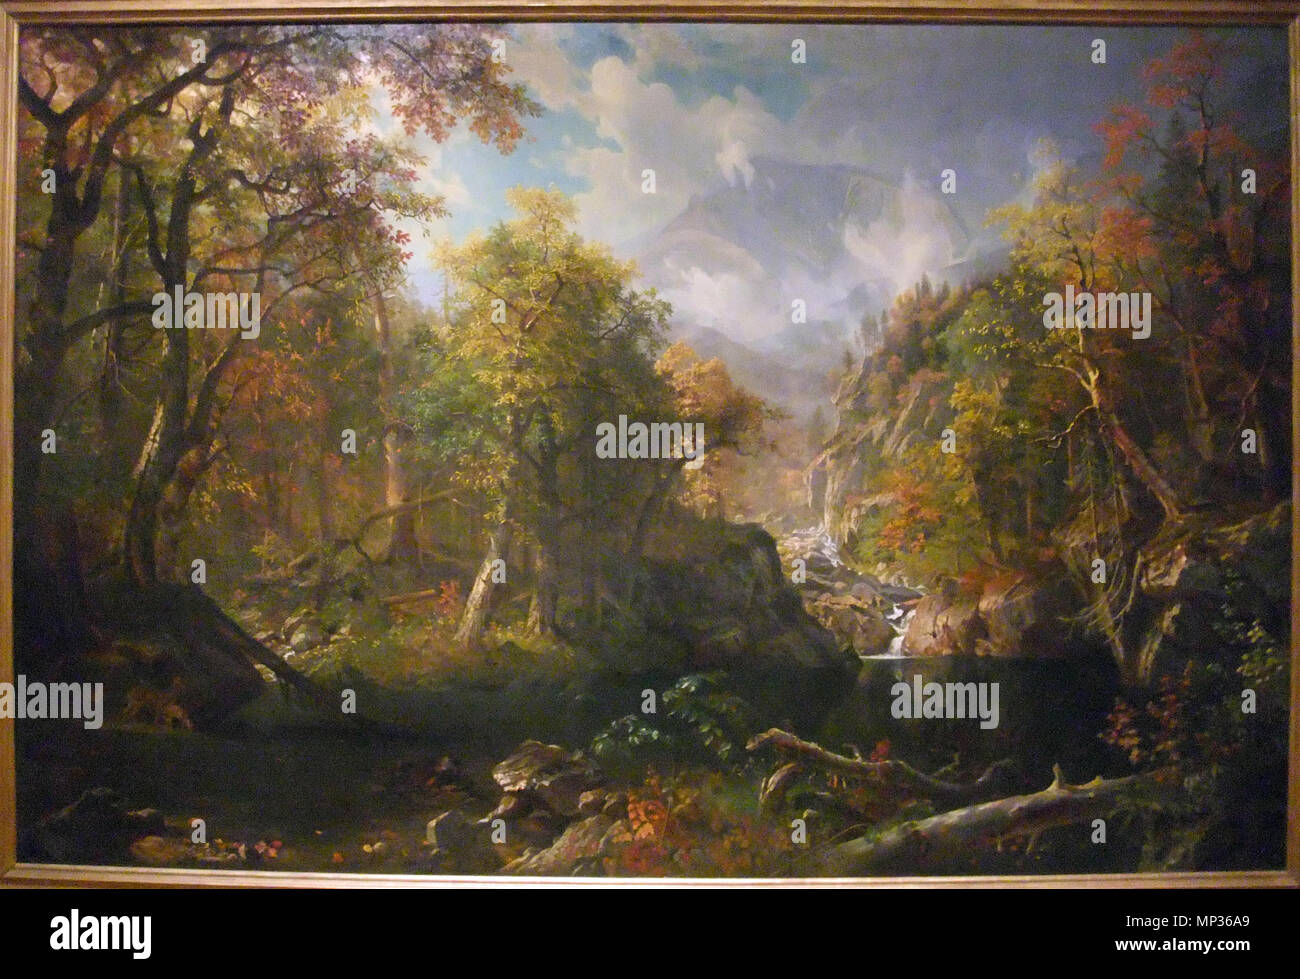 The Emerald Pool .  English: The Emerald Pool (1870) by Albert Bierstadt. painting, oil on canvas, Chrysler Museum of Art, Bequest of Walter P. Chrysler, Jr. . 1870.   1172 The Emerald Pool (1870) by Albert Bierstadt Stock Photo